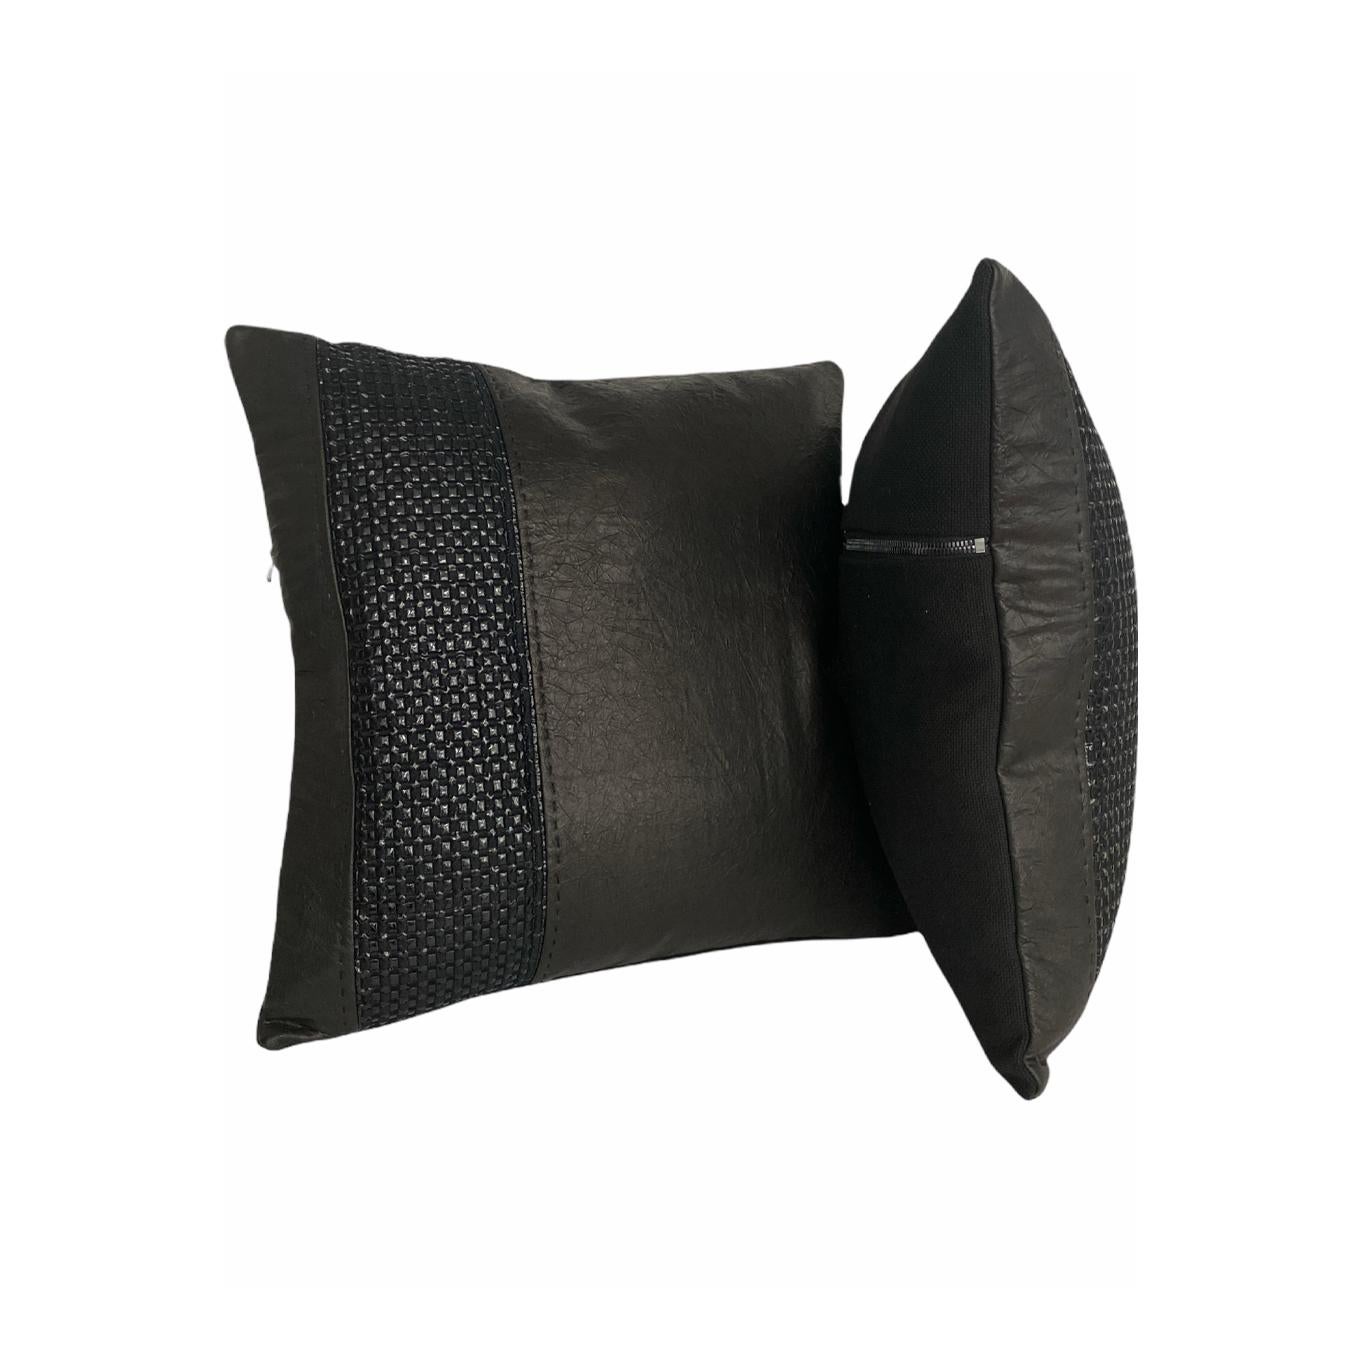 Signature leather pillow in black
A perfect complement to any design, our signature pillow makes a statement, yet effortlessly pairs with virtually any pattern or color palette. Each piece is unique and may vary slightly in color, texture, and